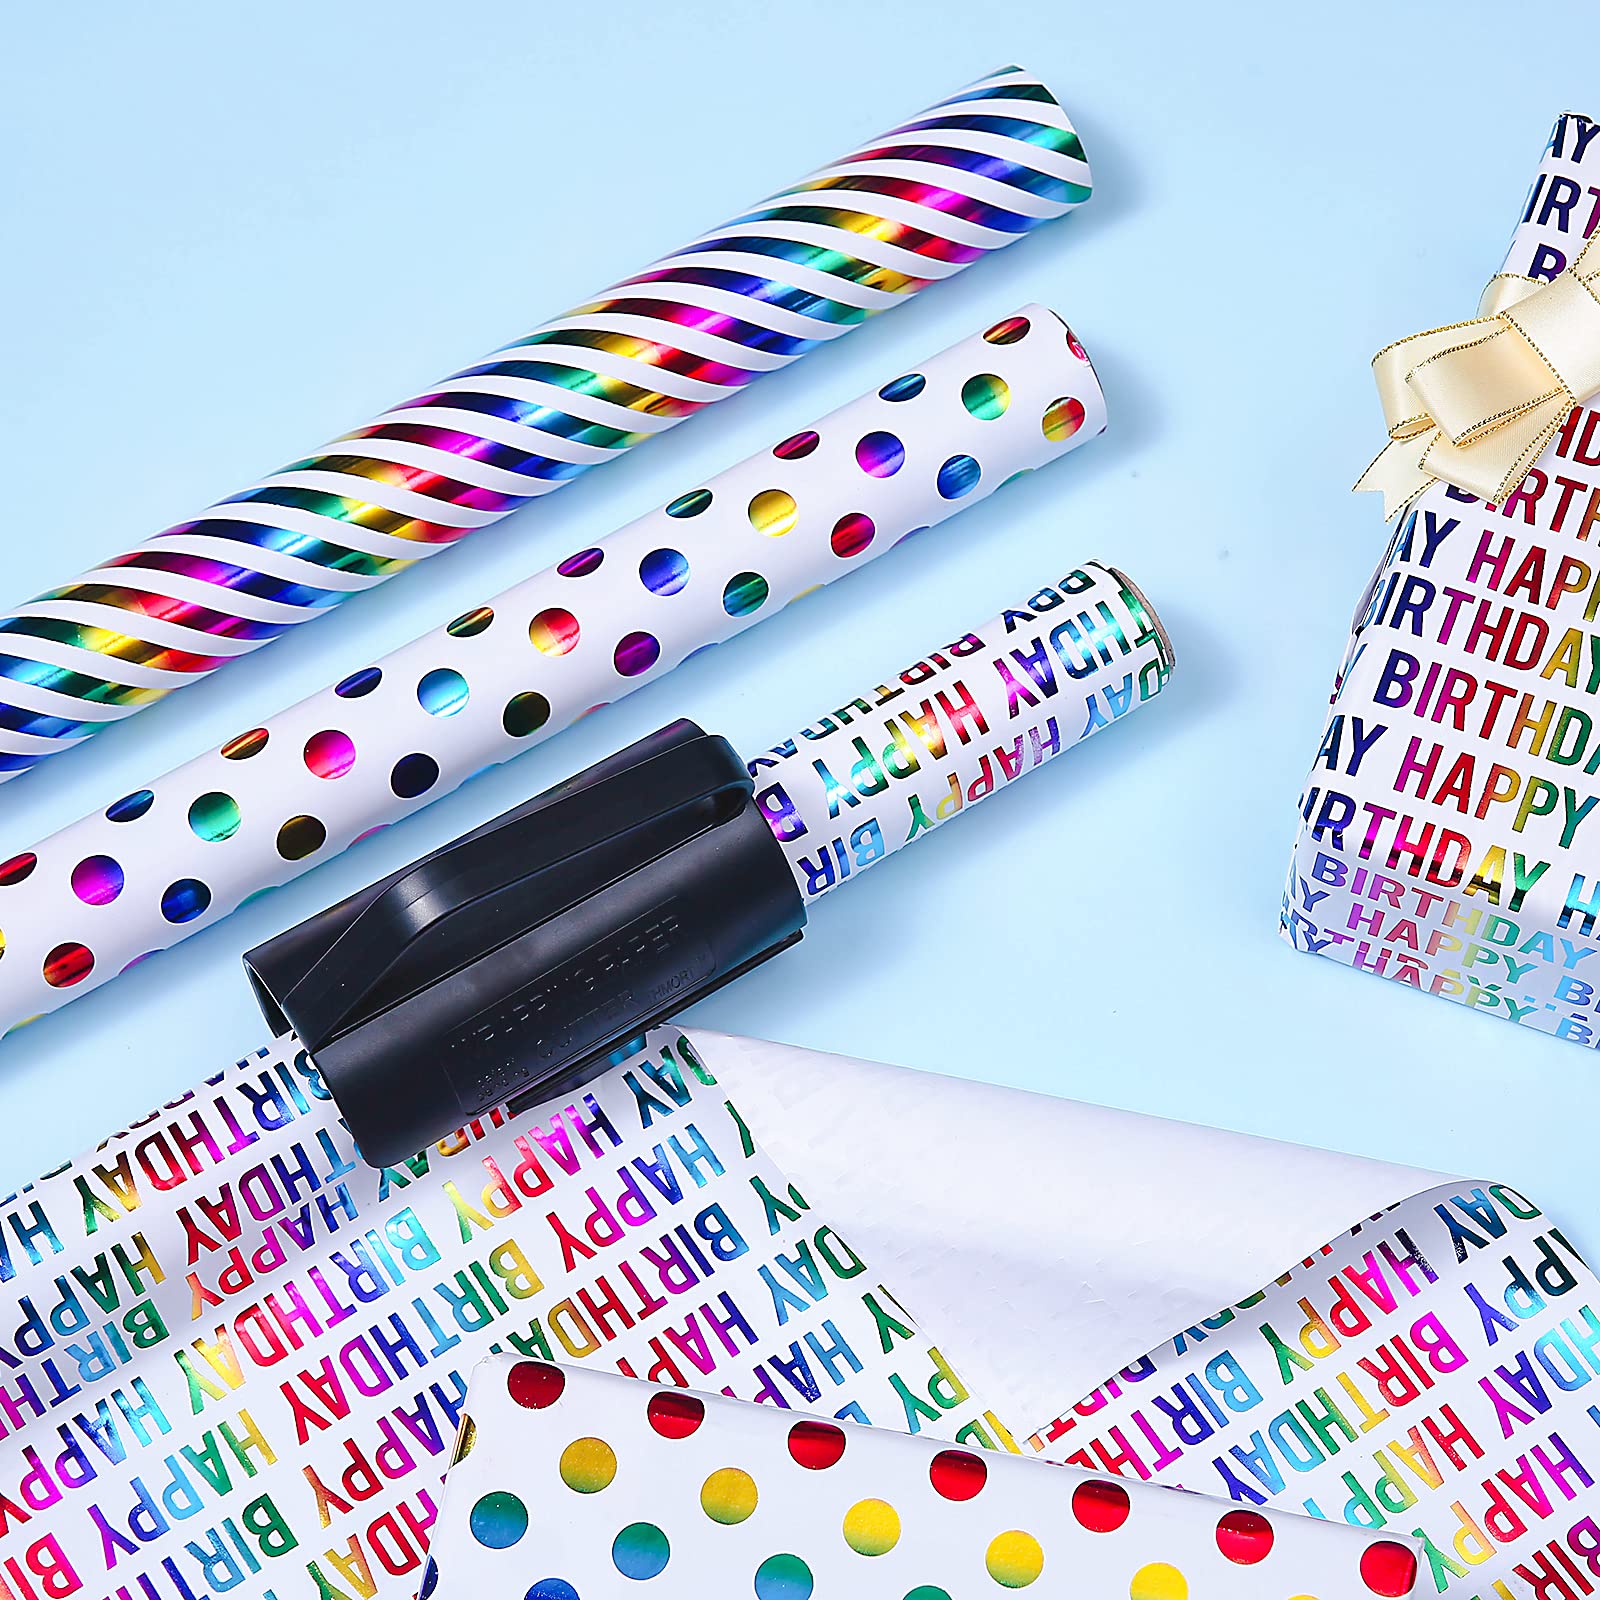 THMORT Birthday Wrapping Paper Roll with a Cutter Kit for Boys&Girls,Adults,Kids Foil mini rolls 17 Inch X 120 Inch Gift Wrapping Paper Roll Colorful Foil Rainbow Silver Happy Birthday Lettering.